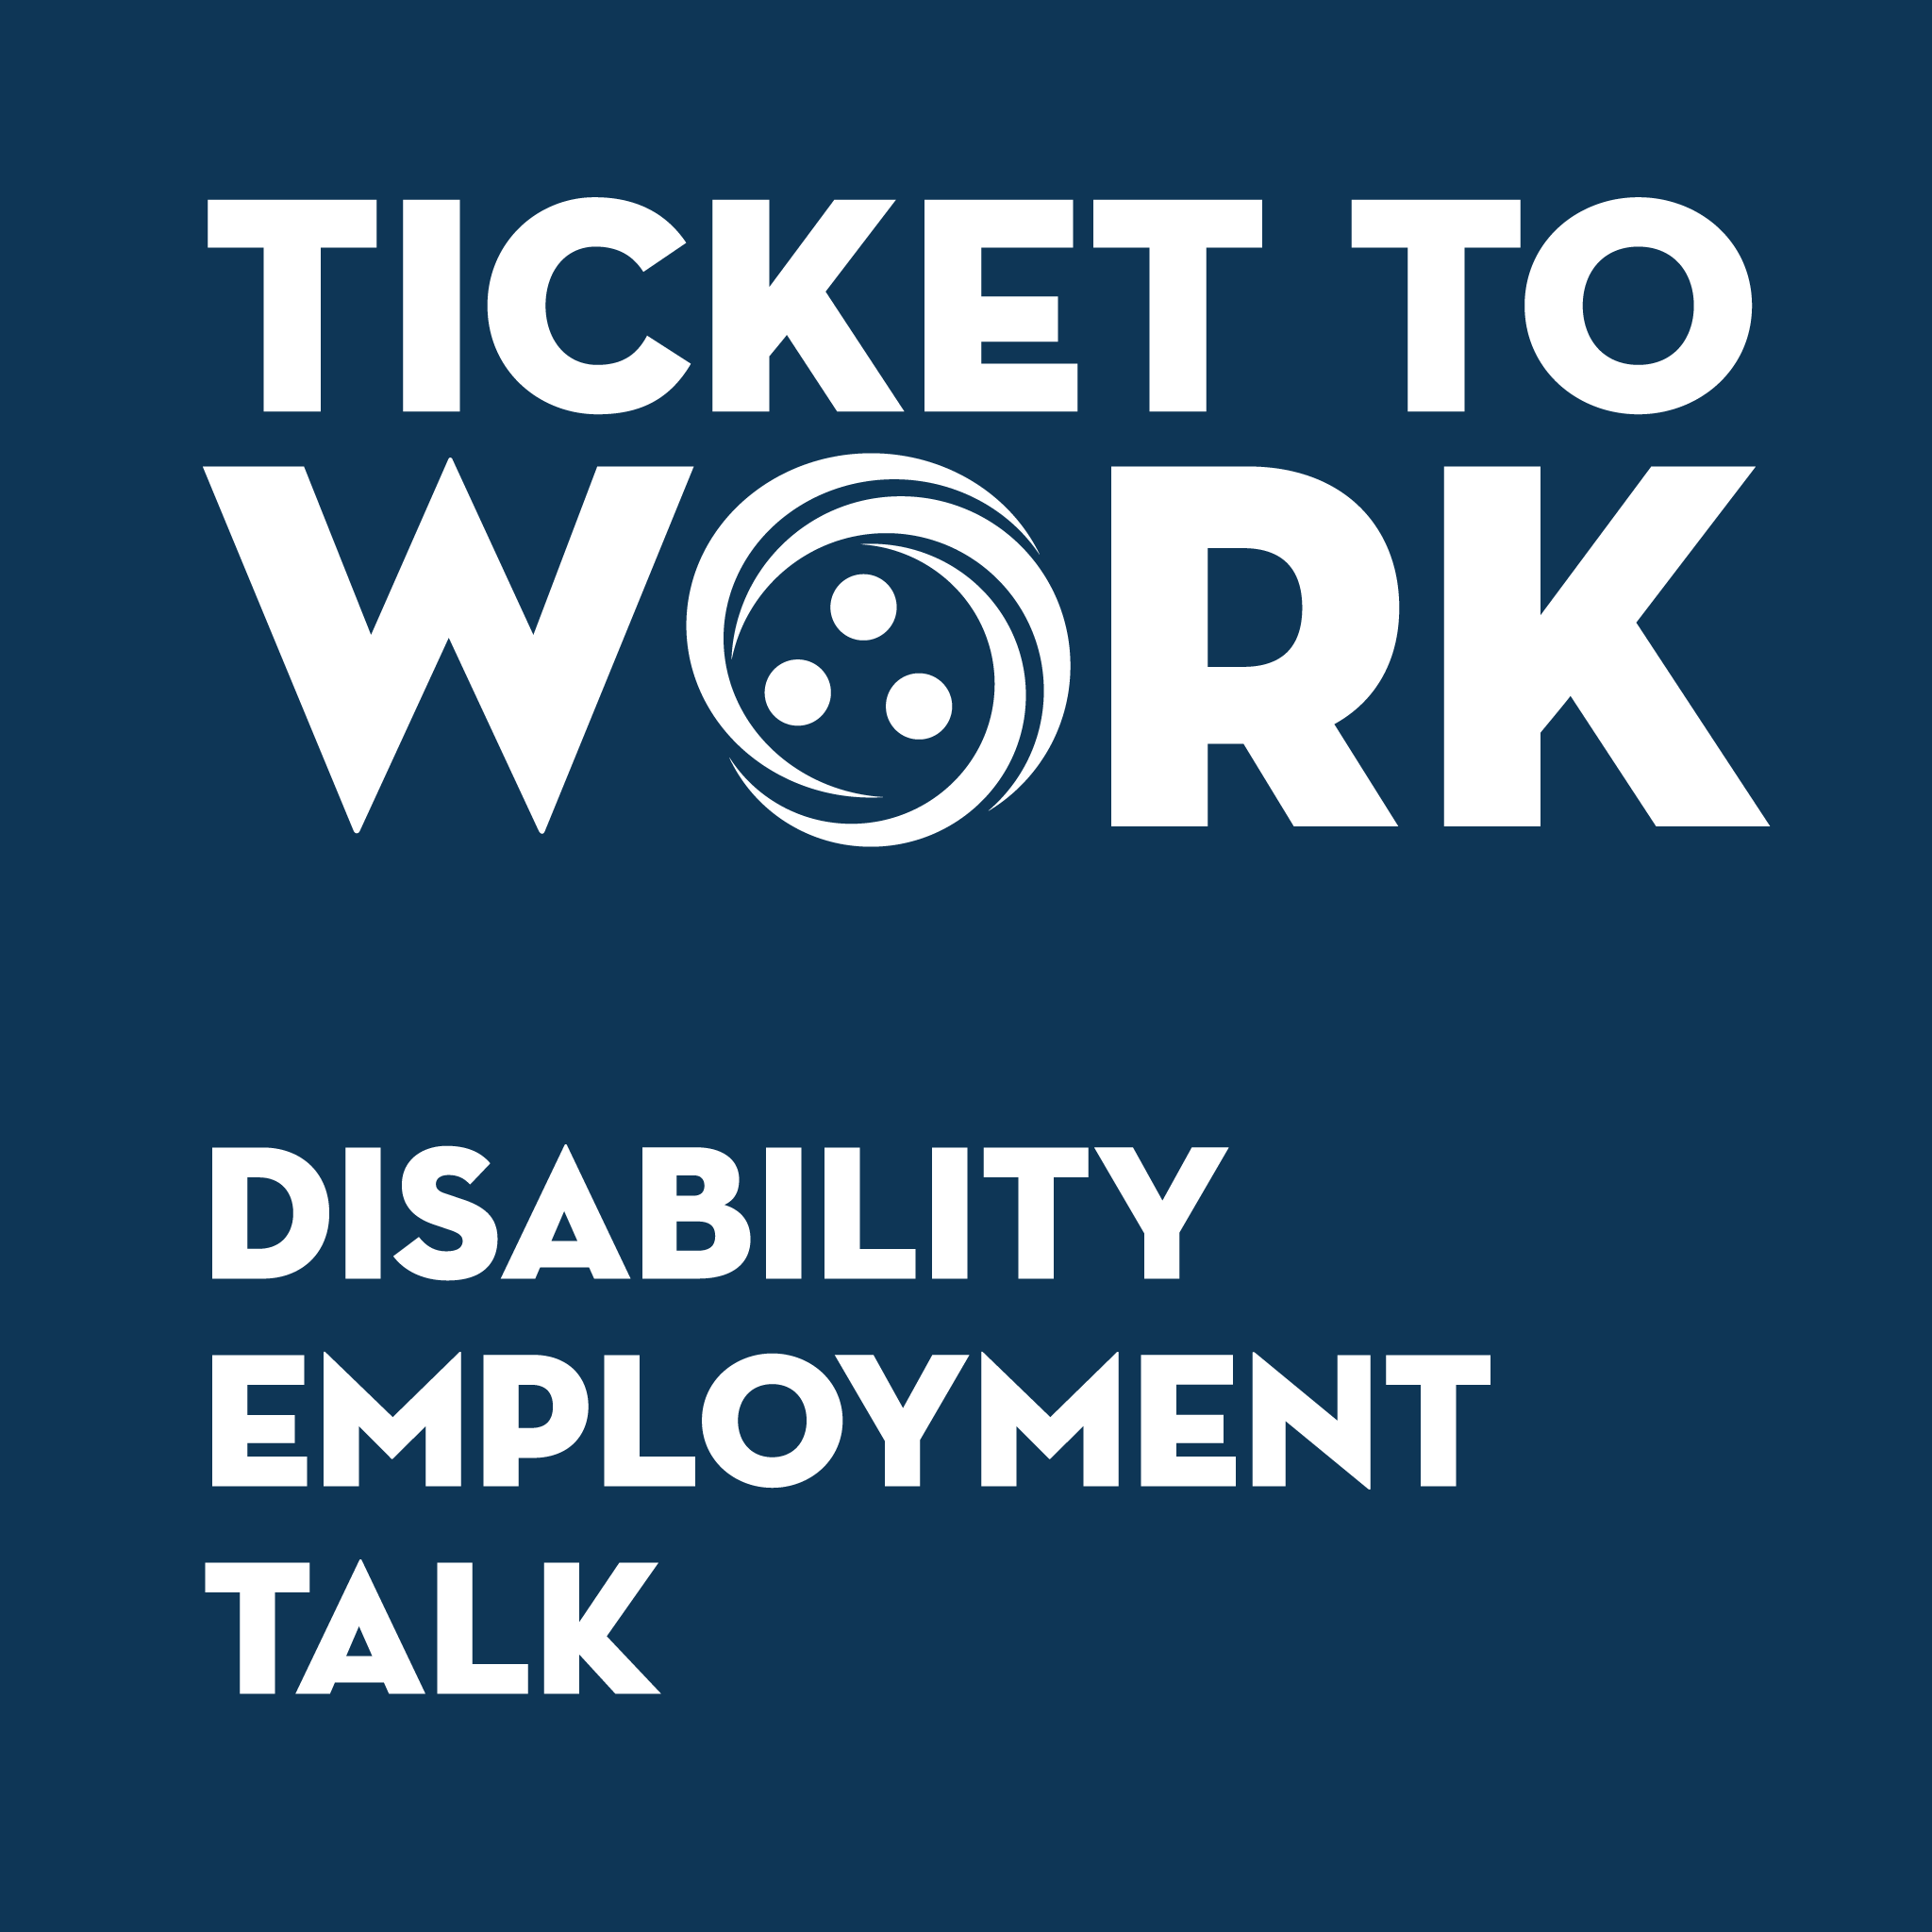 Ticket Talk #16: Three Resources That Can Help You Obtain Job Accommodations - Ticket to Work - Social Security